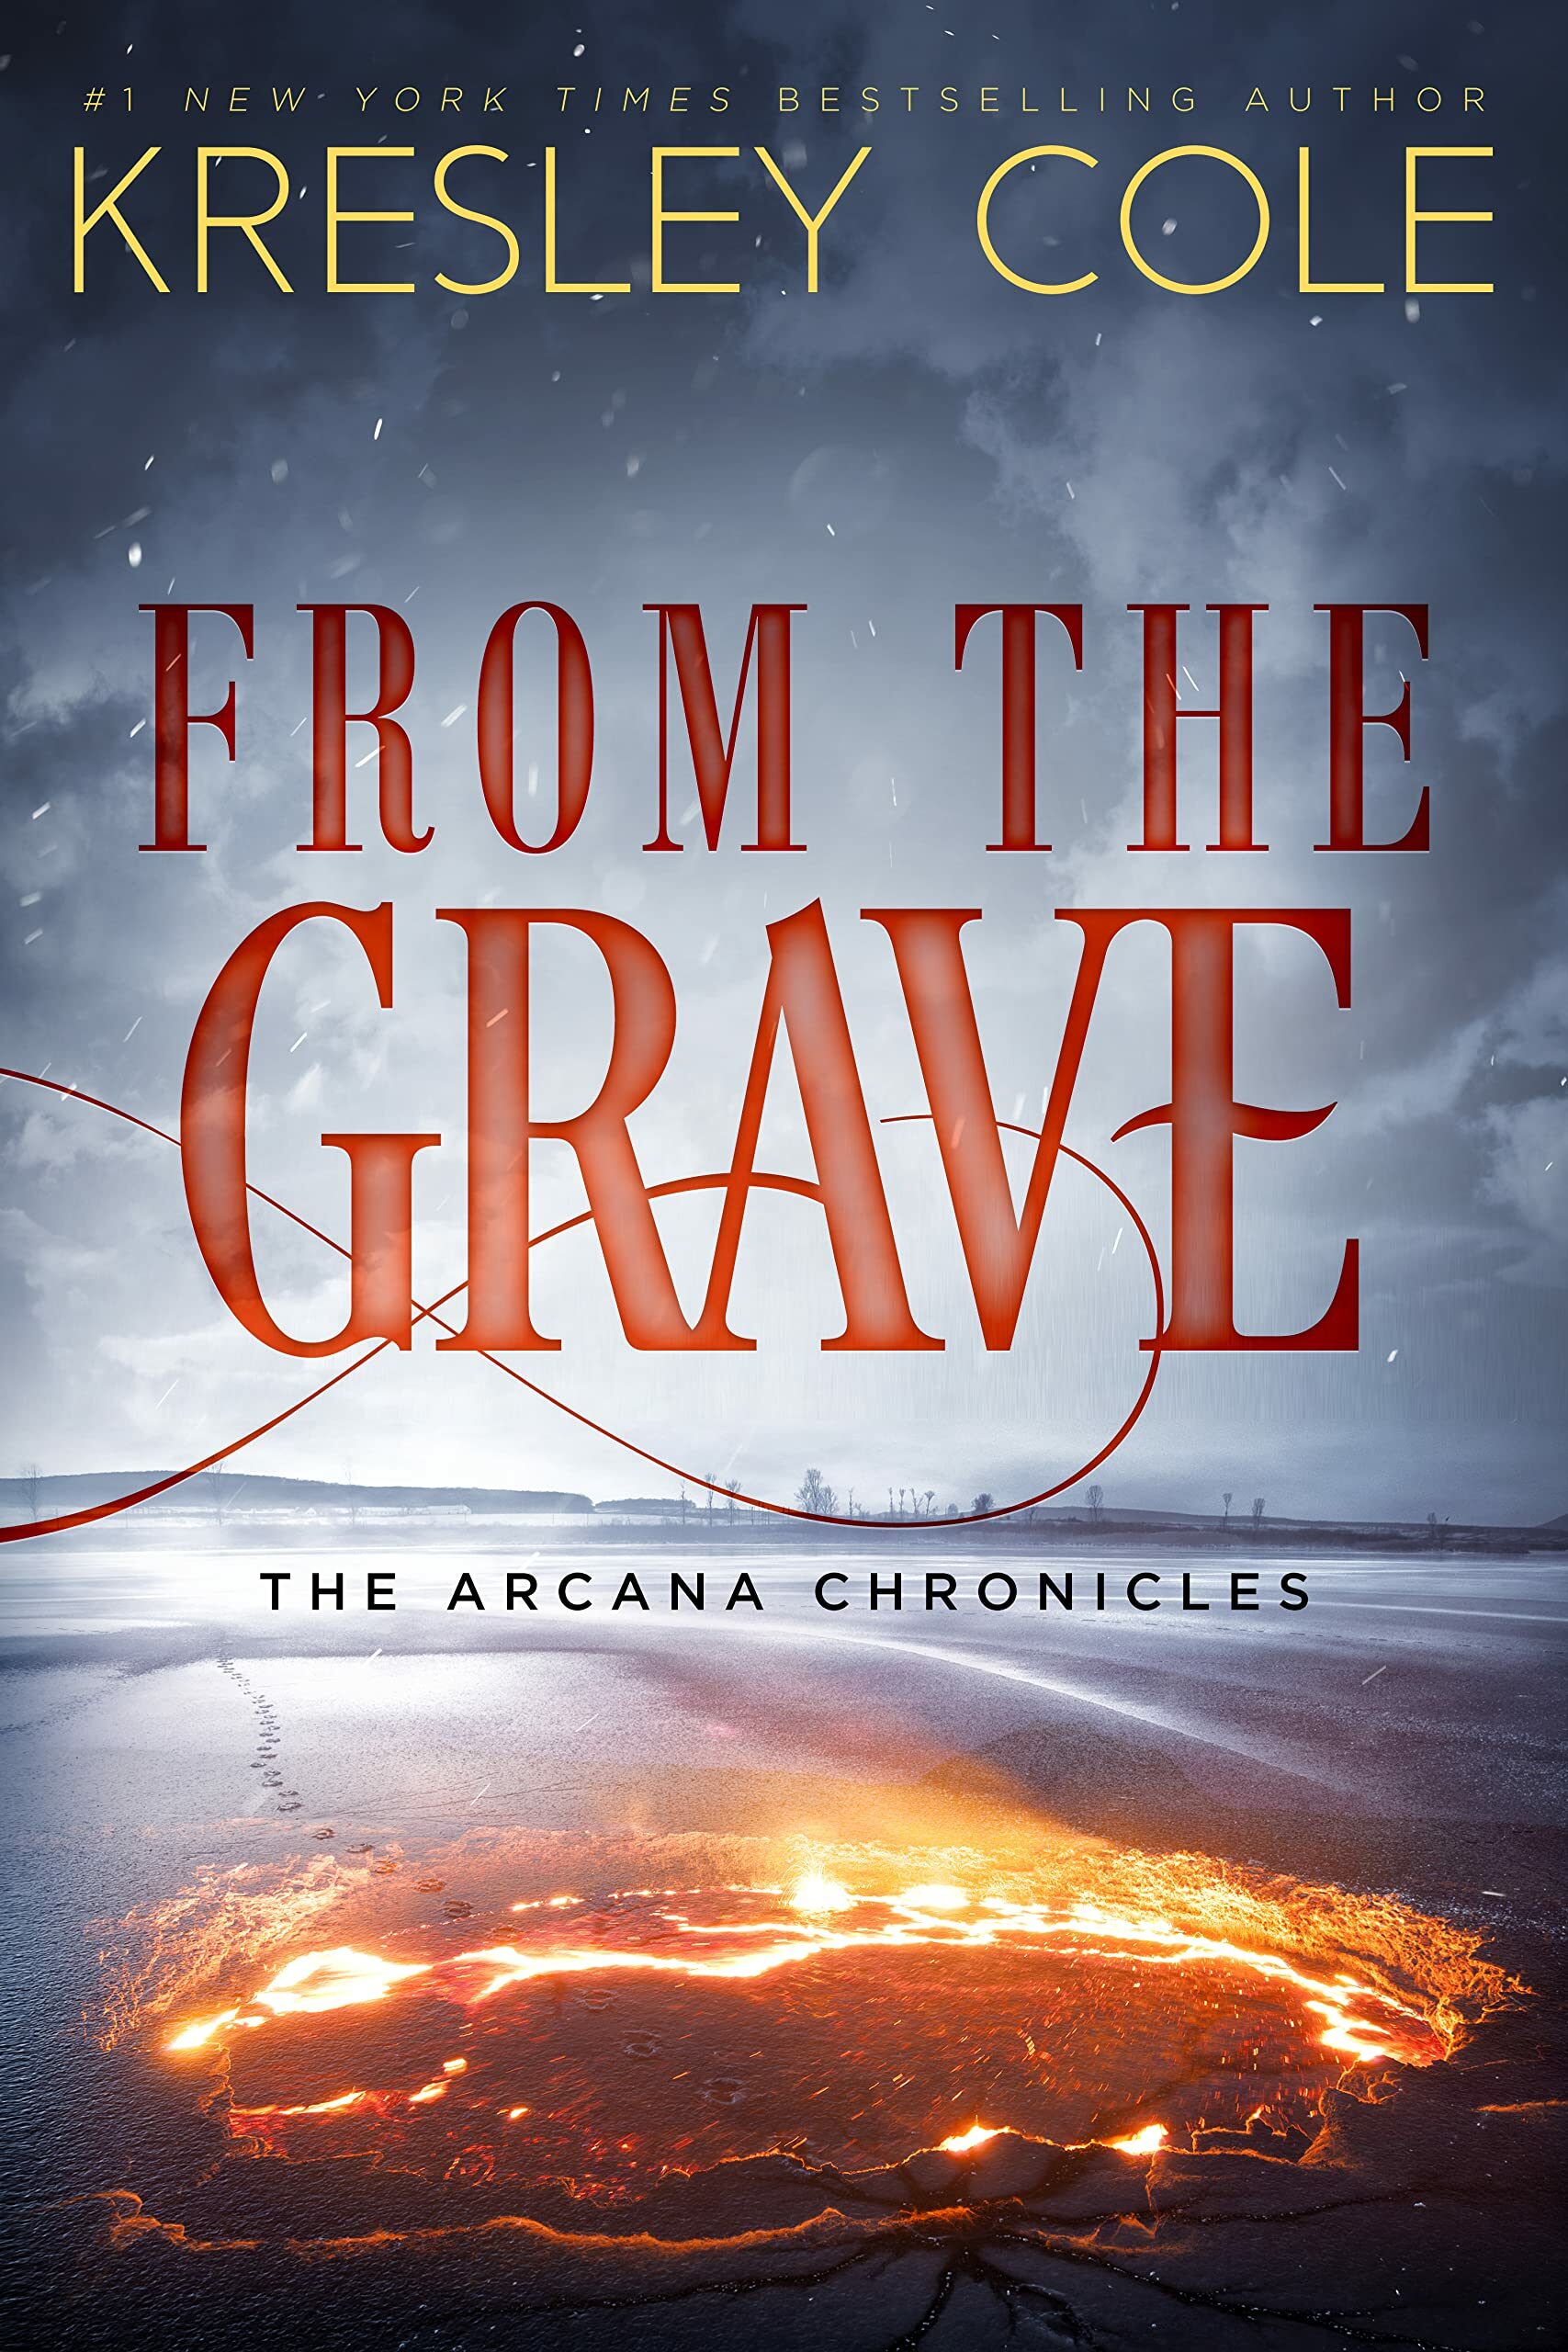 From the Grave (The Arcana Chronicles #6)